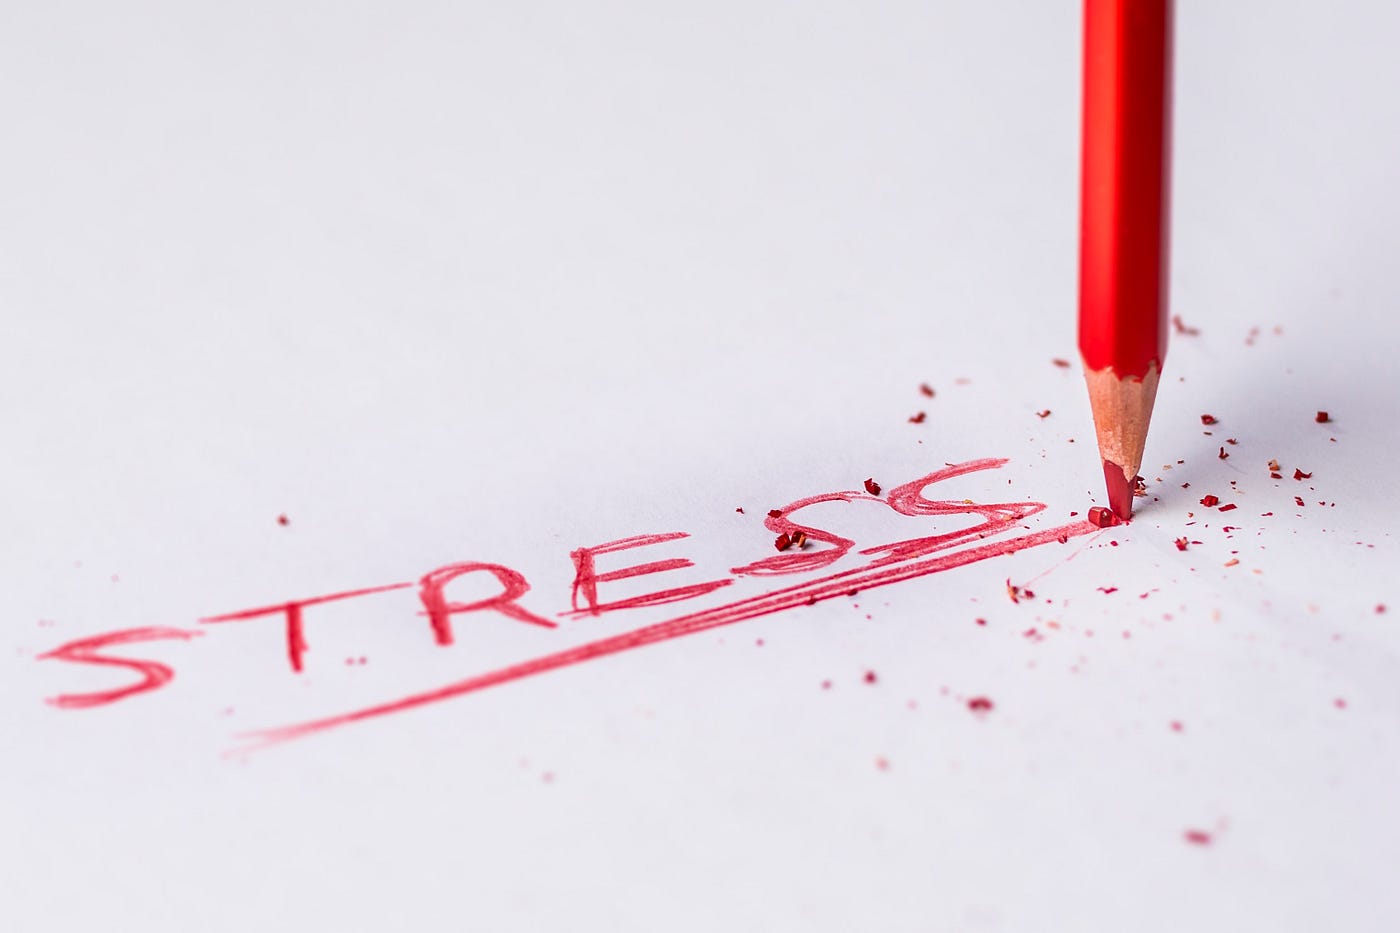 The word STRESS is written by a red colored pencil.